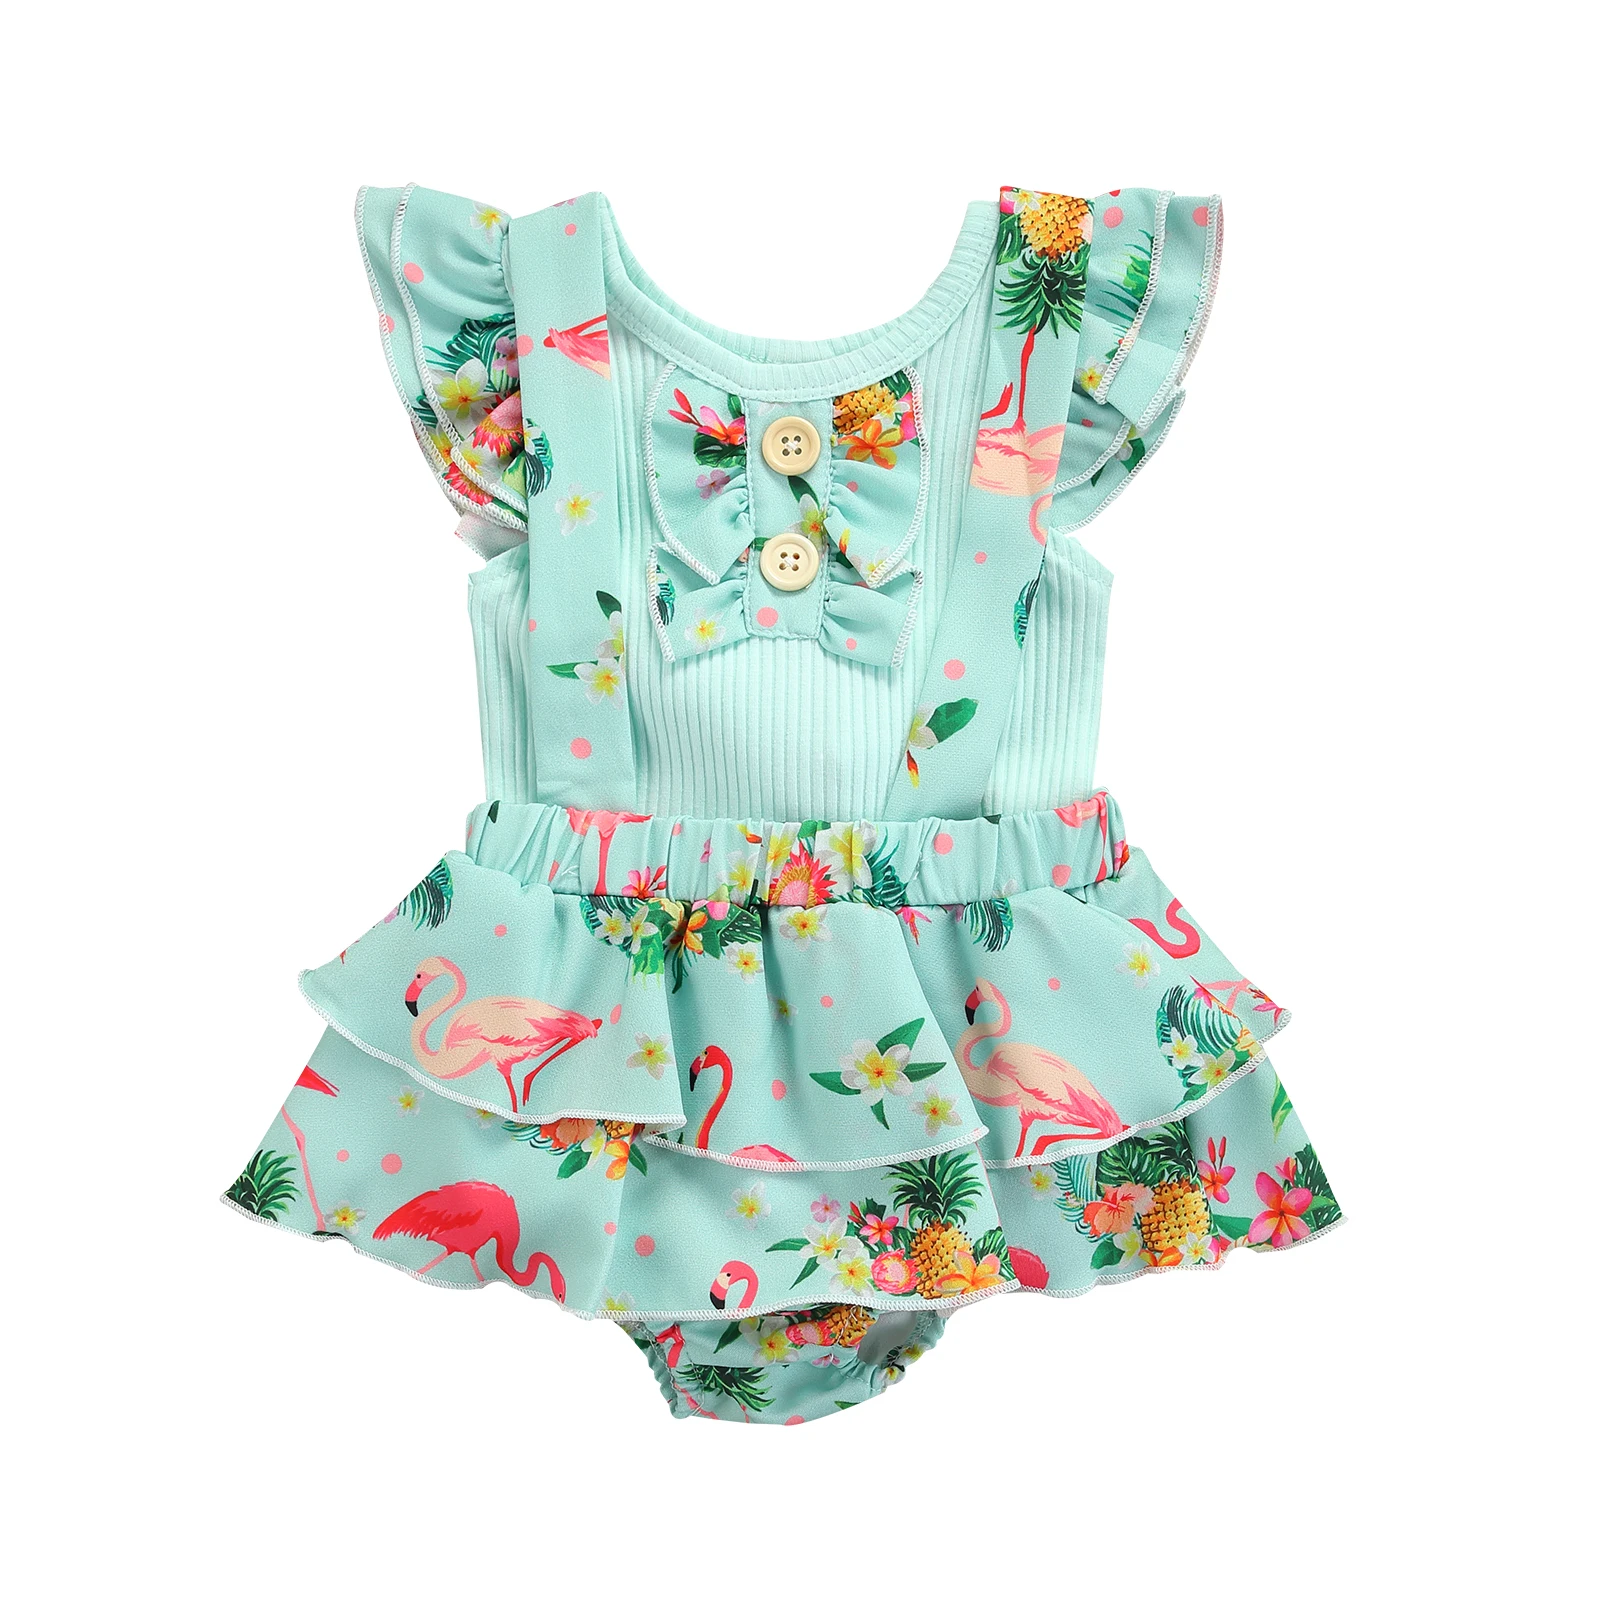 

Newborn Flamingo Print Outfit Baby Girl Clothes Ruffled Ribbed Fly Sleeve Round Neck T-shirt Suspender Pants Children's Clothing